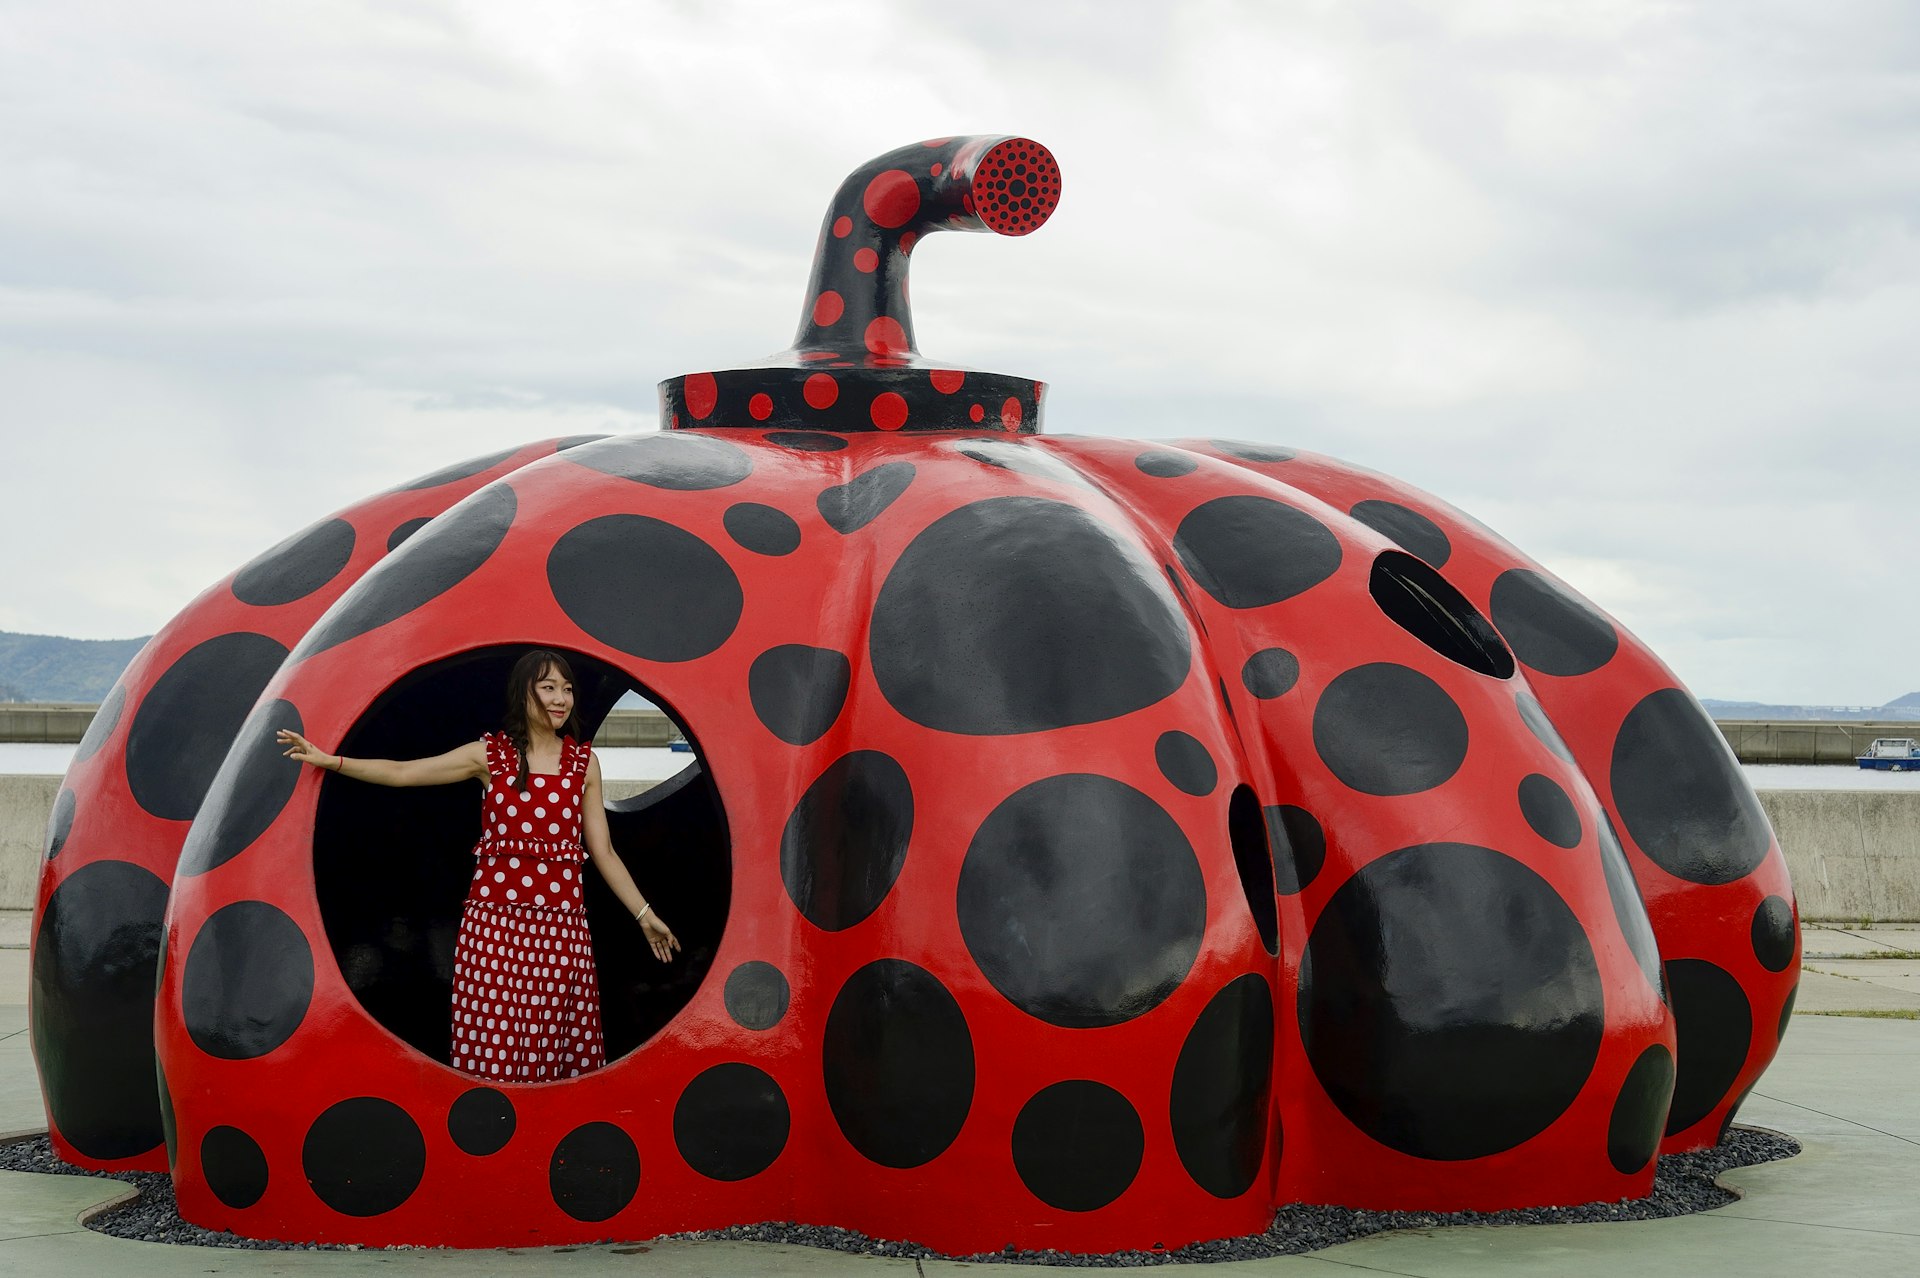 A woman wearing a red and white polka-dot dress stands inside a large red and black polka-dot pumpkin in Naoshima. 